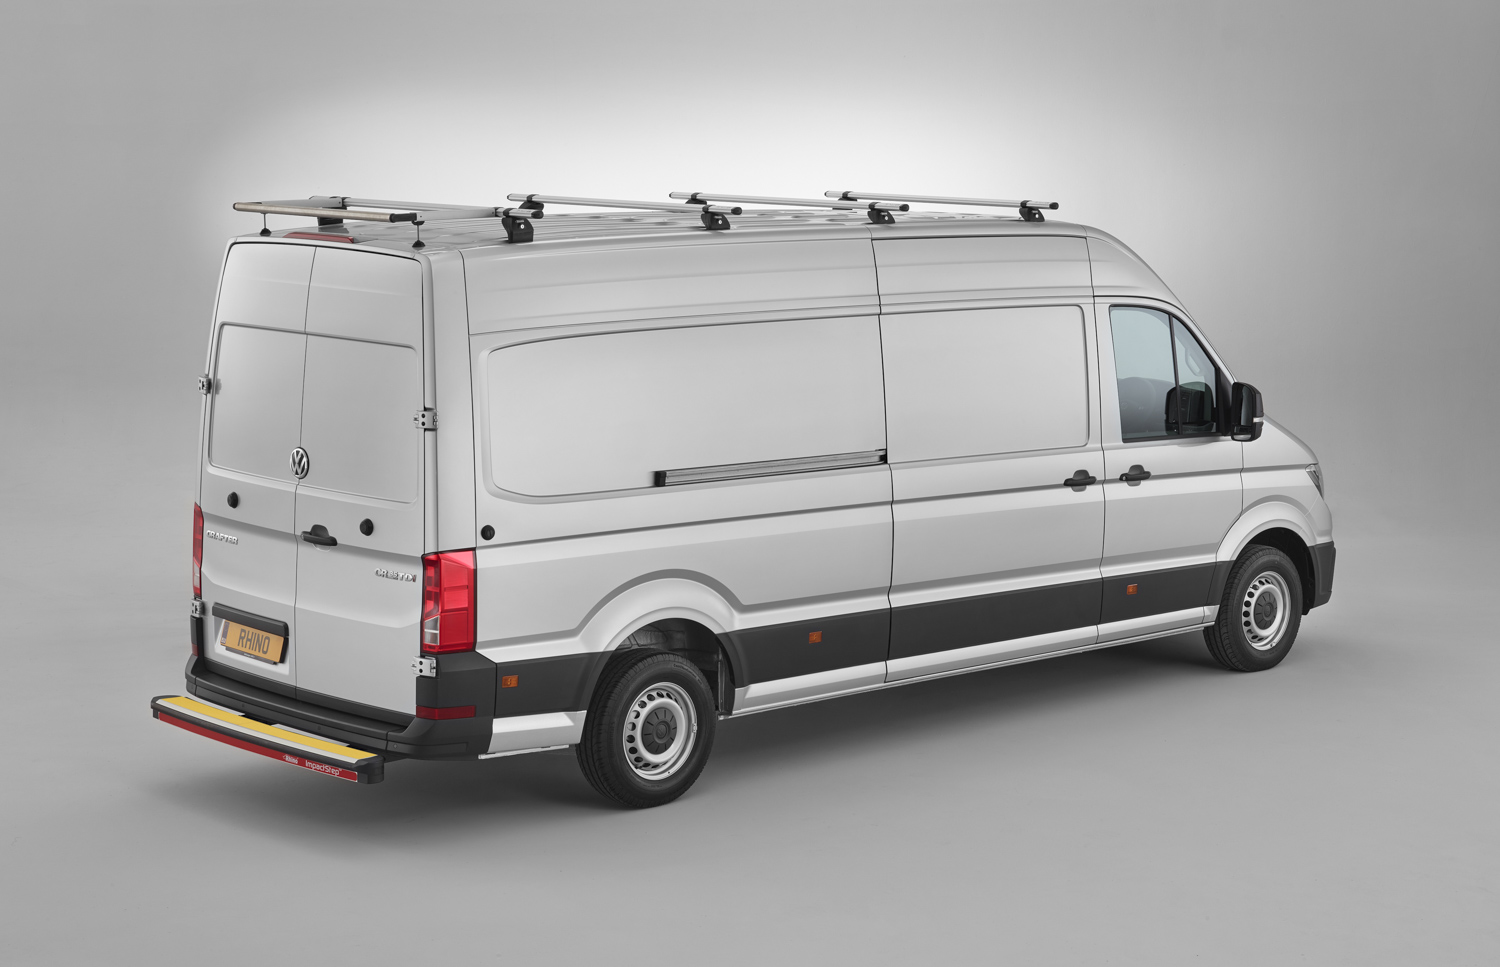 VW-Crafter-ImpactStep-and-Kamm-Bars-with-Roller